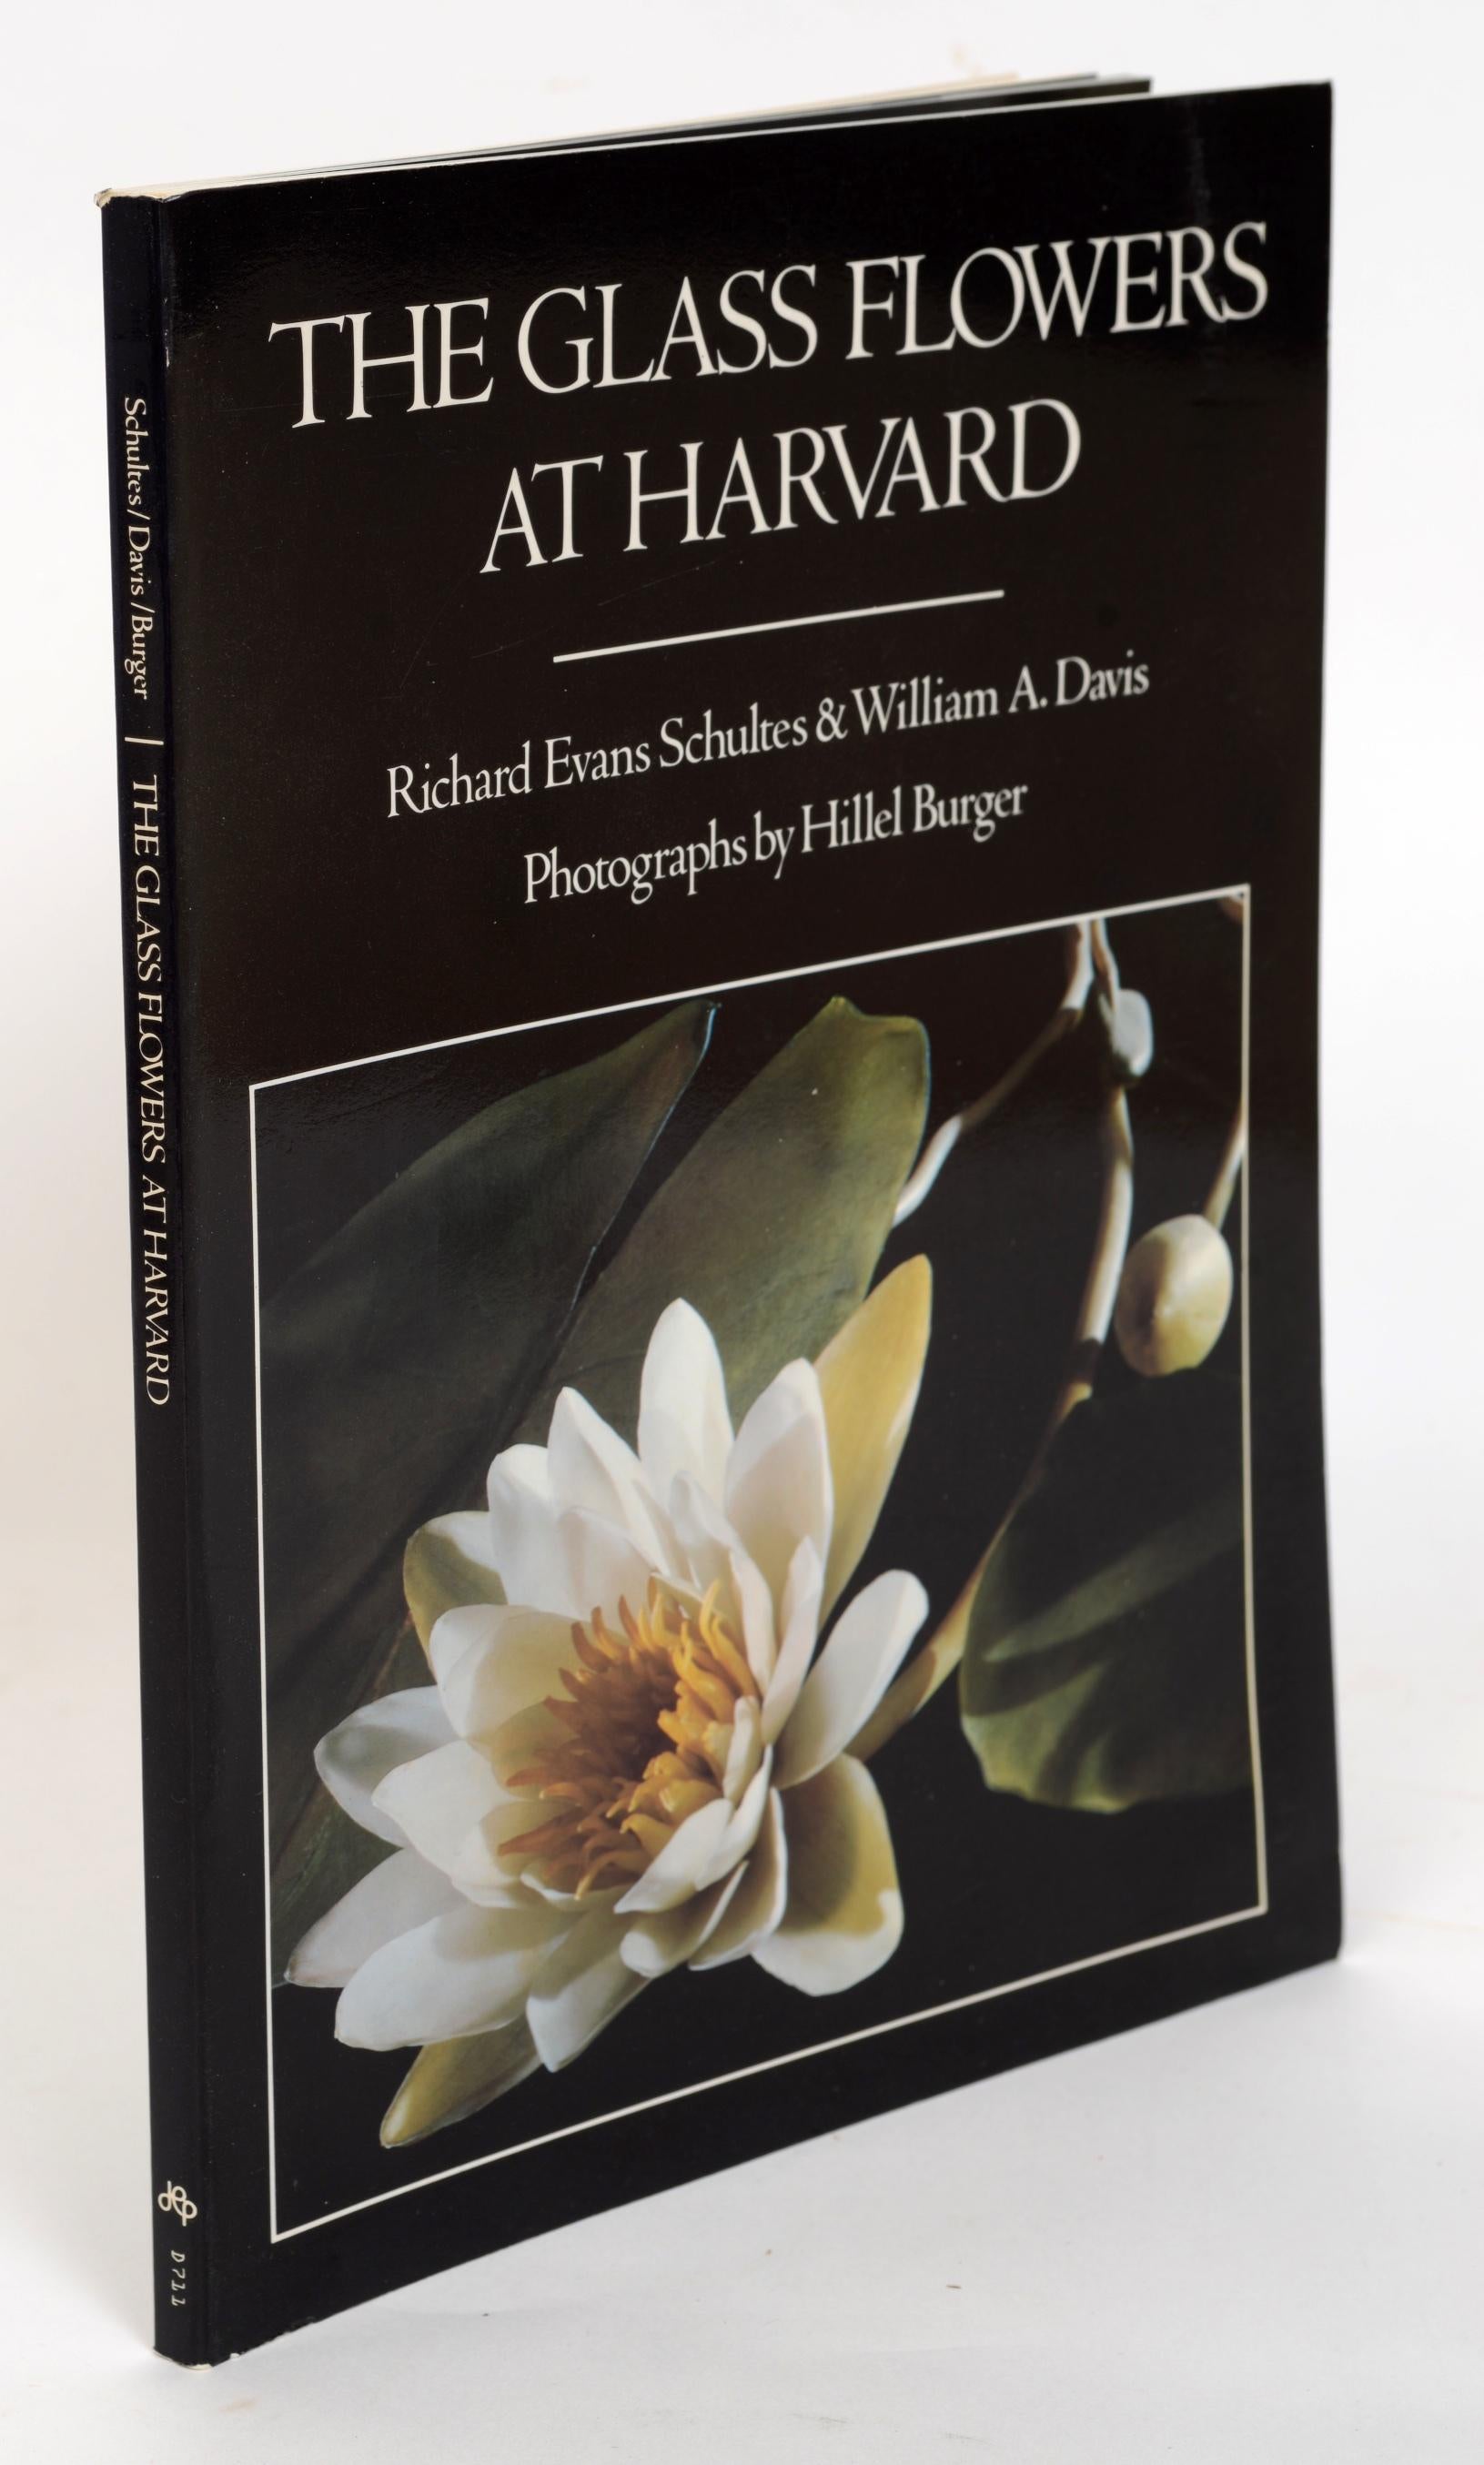 The Glass Flowers at Harvard by Richard Evans Schultes, First Edition 3